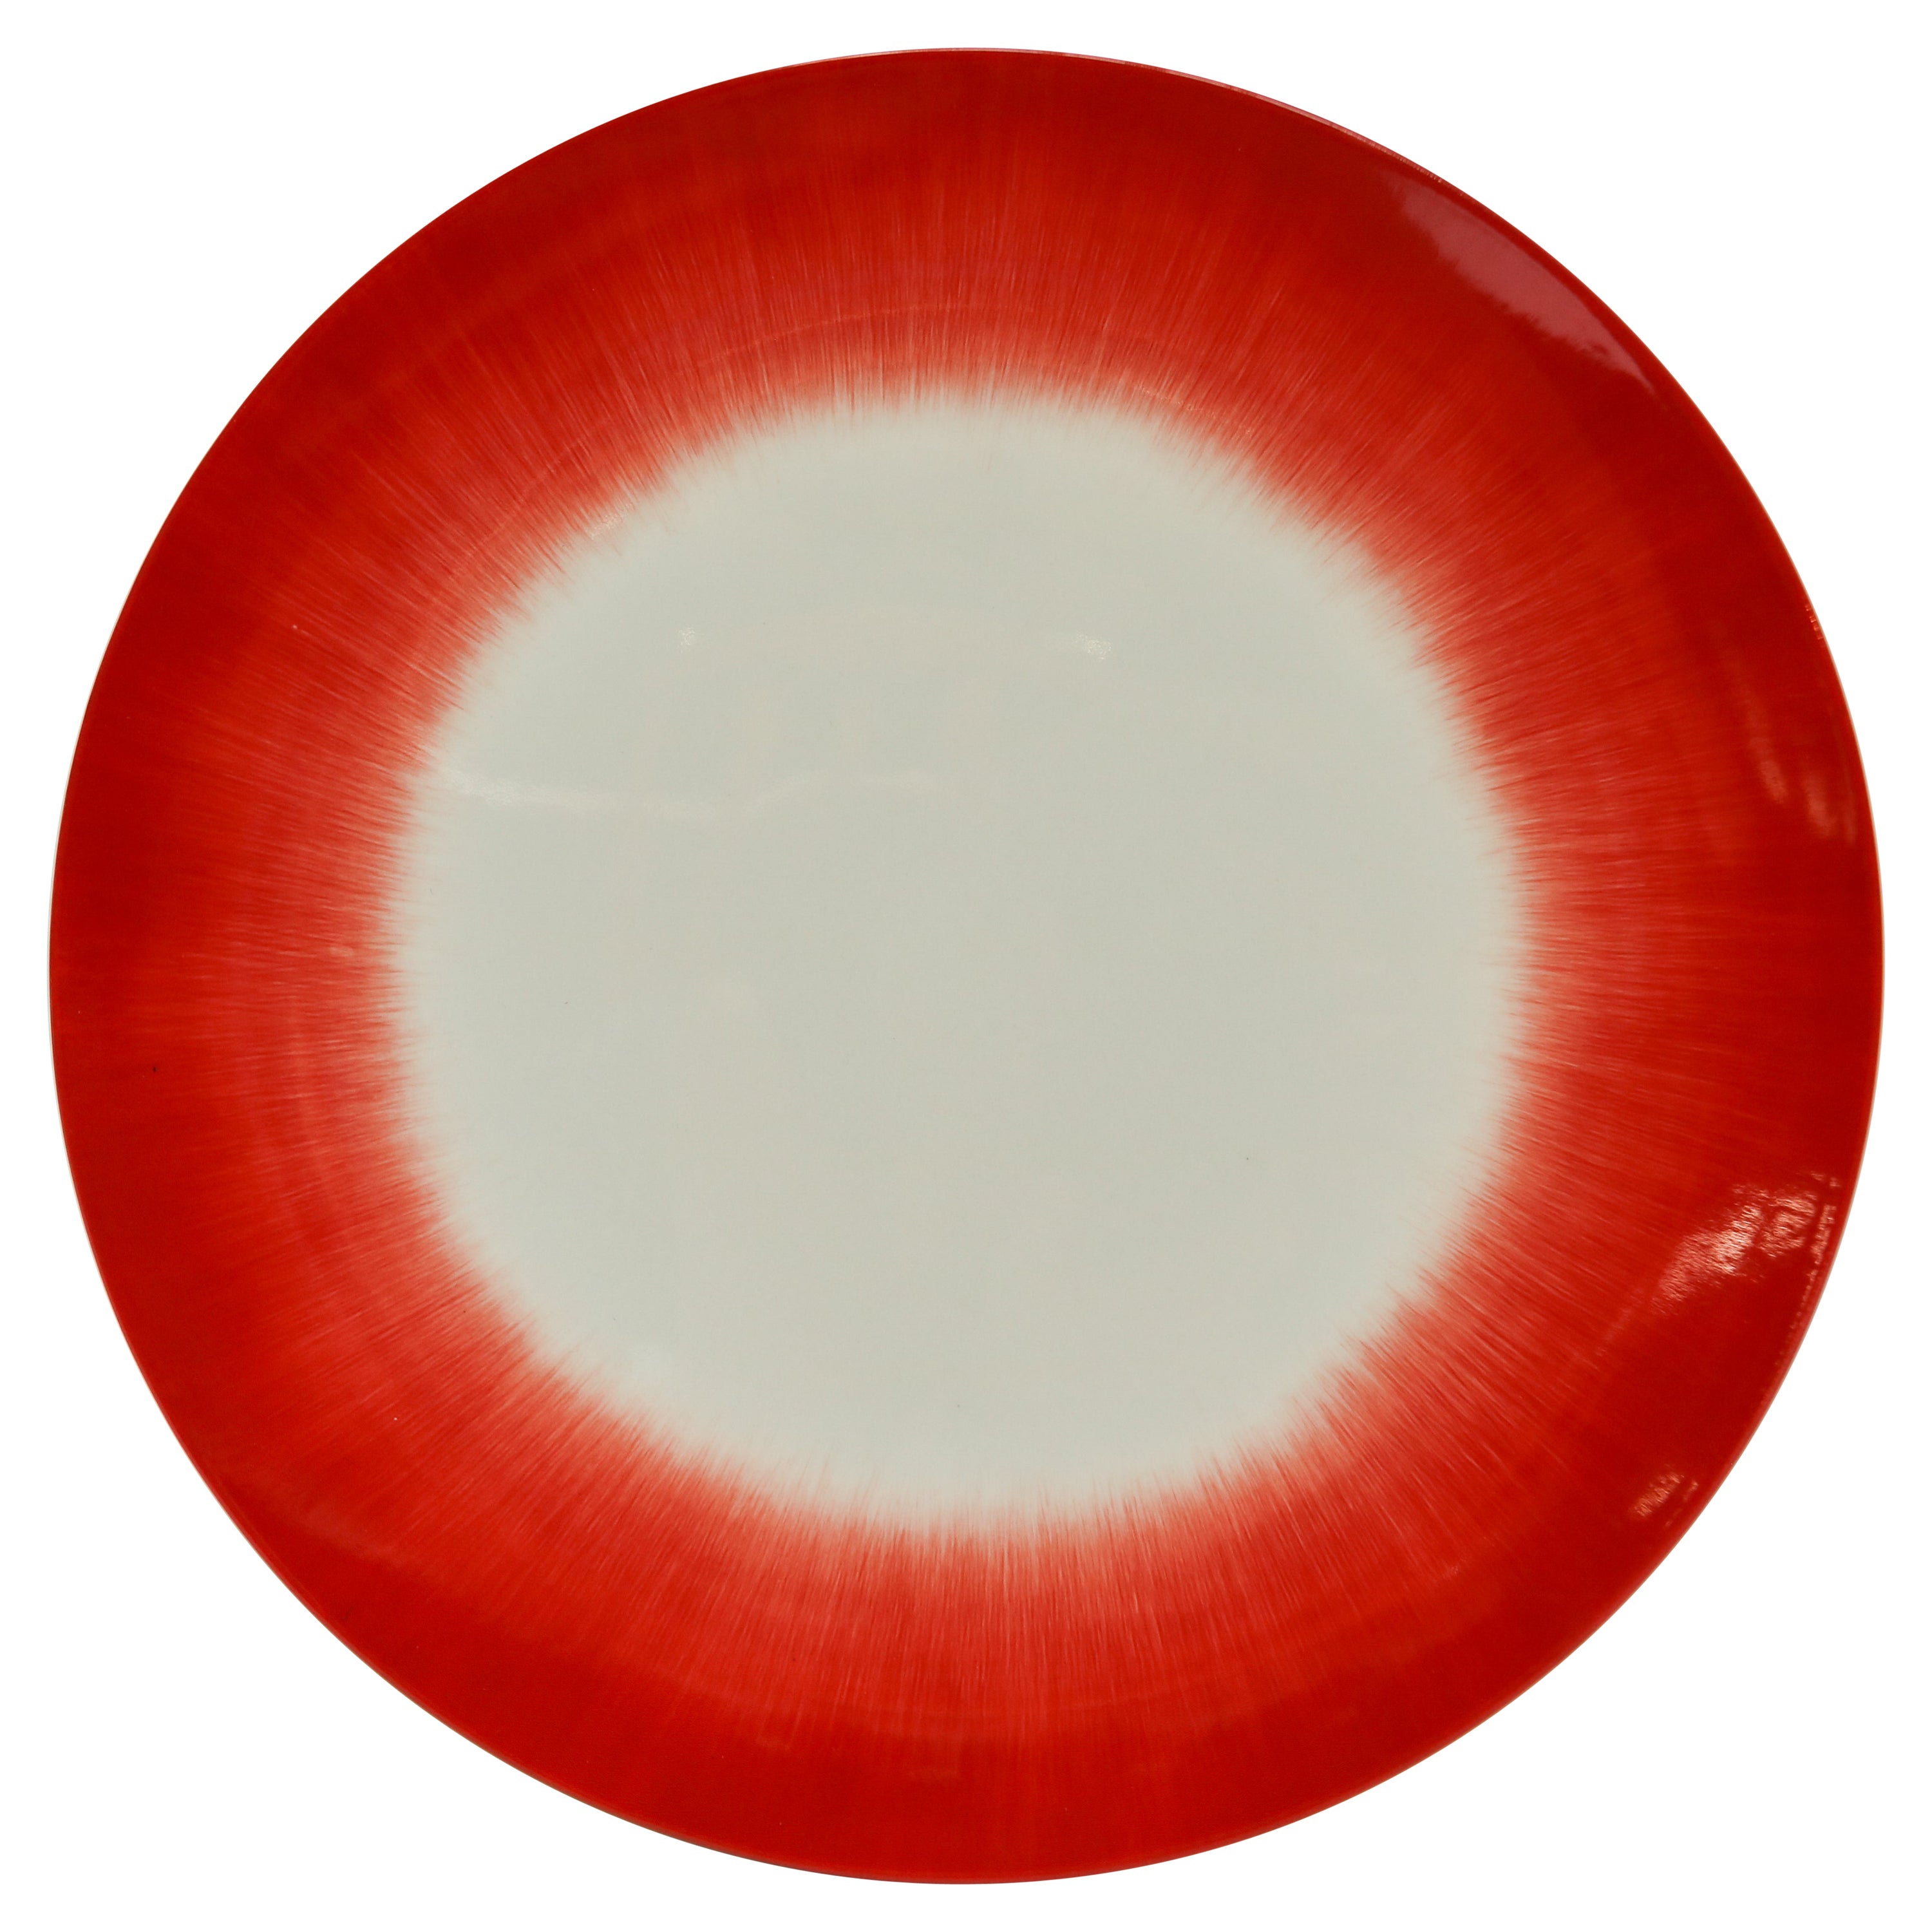 Ann Demeulemeester for Serax Dé Dinner Plate in off White / Red